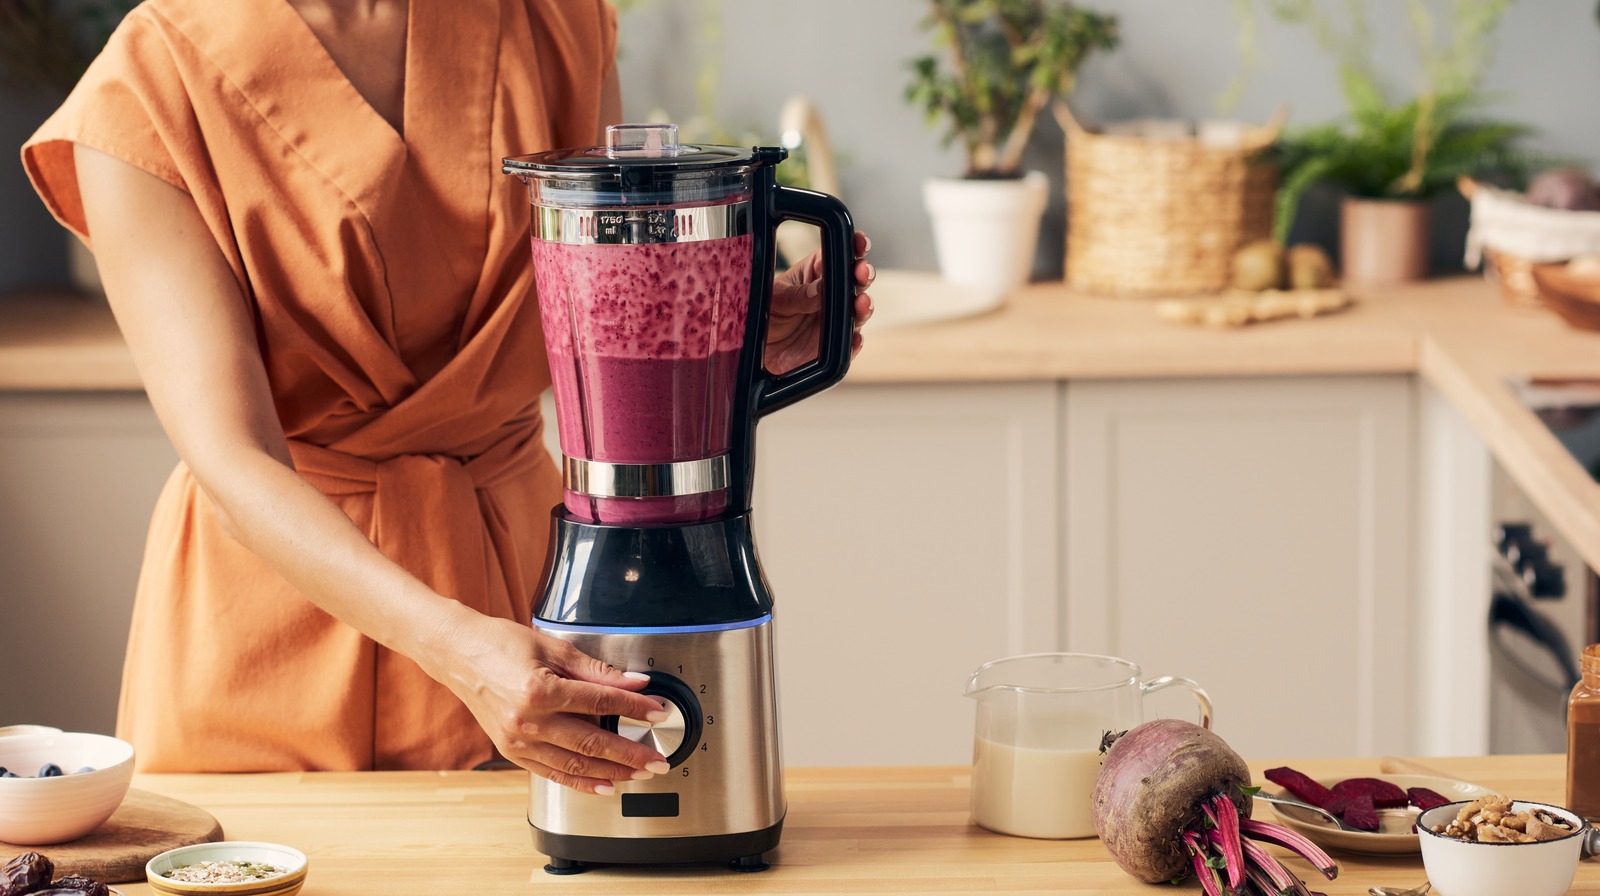 Is It Okay To Substitute A Regular Blender For An Immersion Blender?